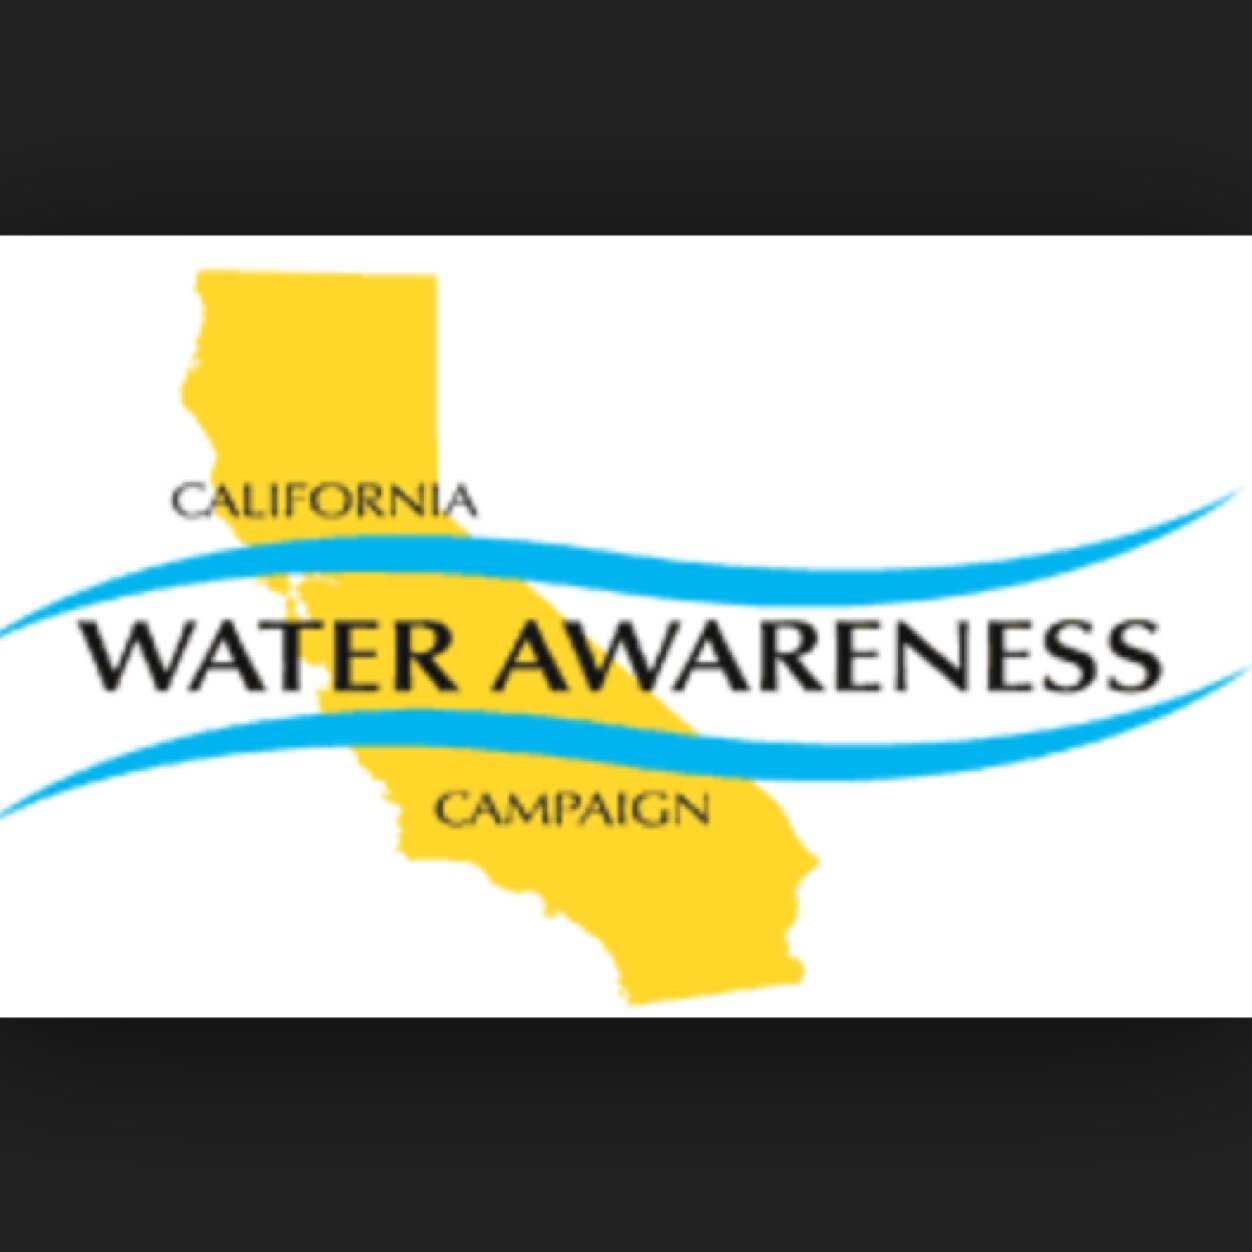 Reaching out to the people of Southern California and adressing them about water issues.